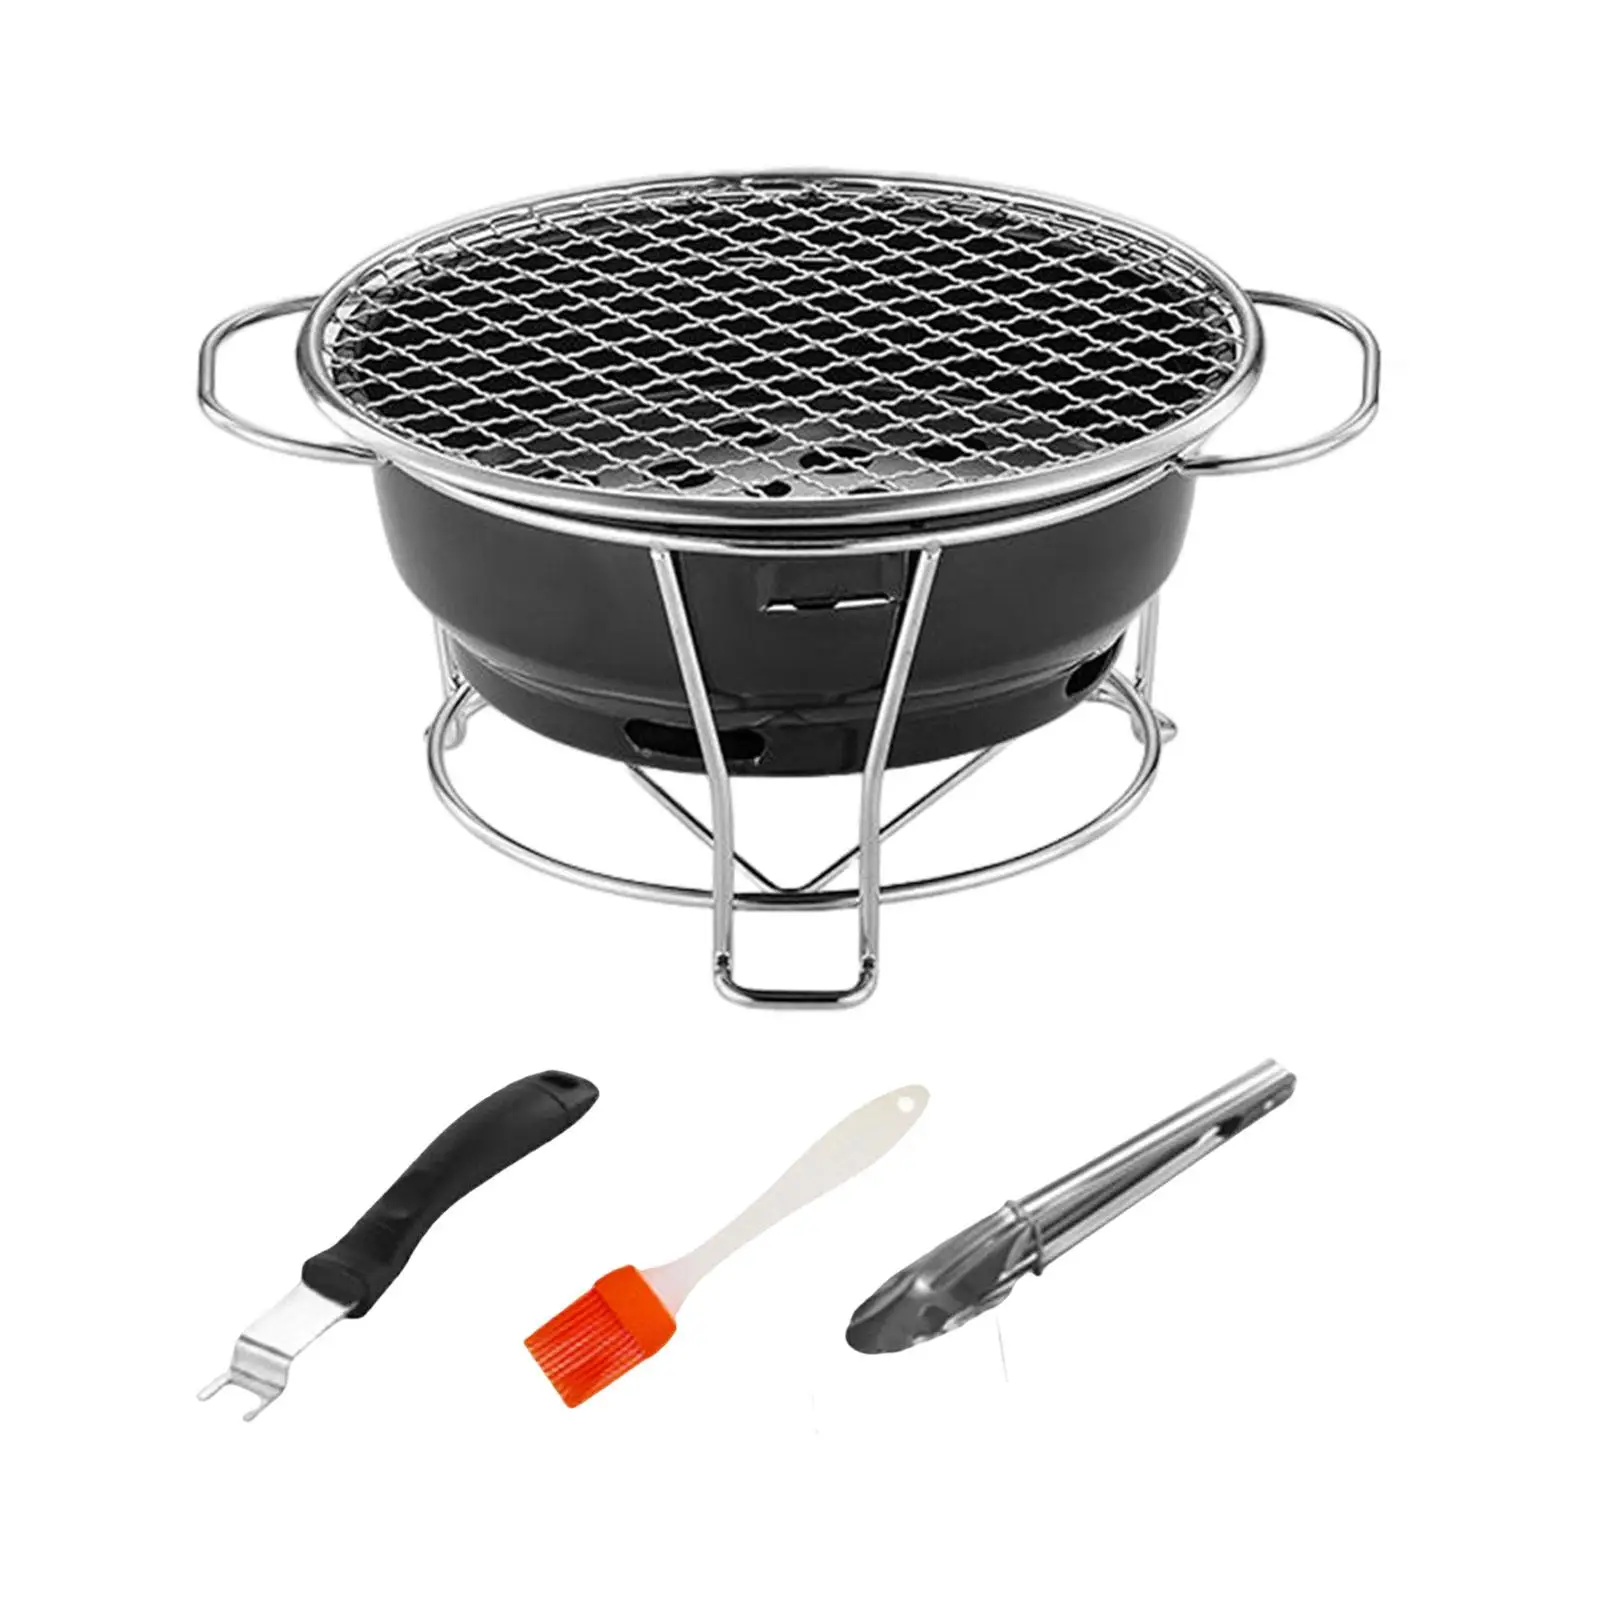 Korean Barbecue Grill Camping BBQ Stove Compact for Outdoor Picnic Backyard